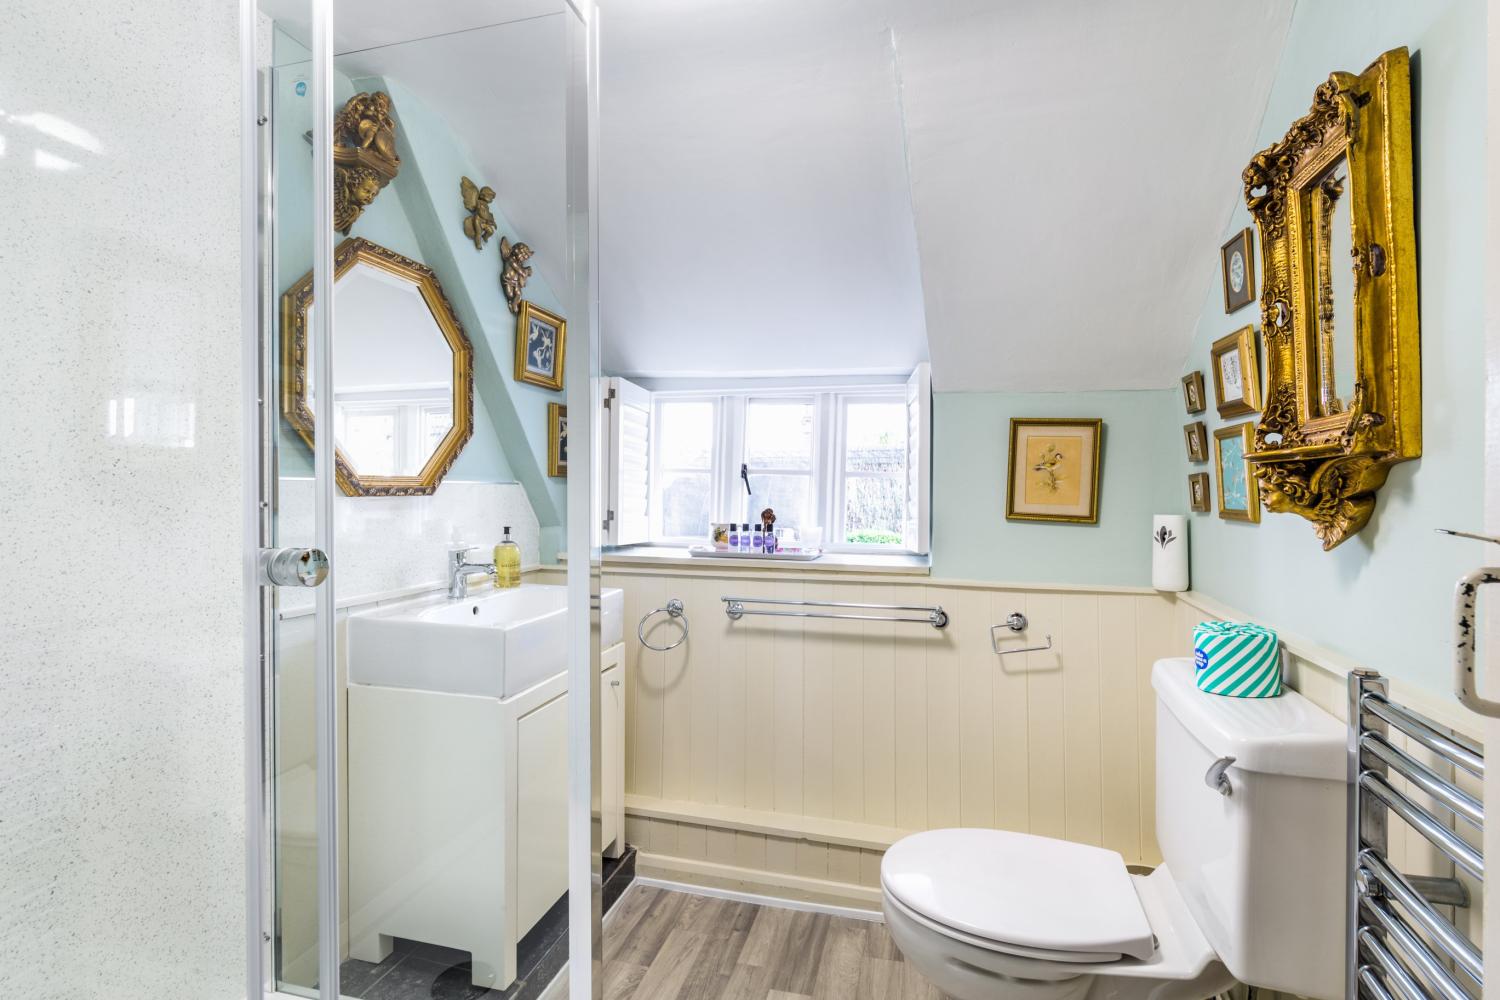 Each of our four en-suite bathrooms is beautifully appointed. This is the en-suite for Peacock bedroom.